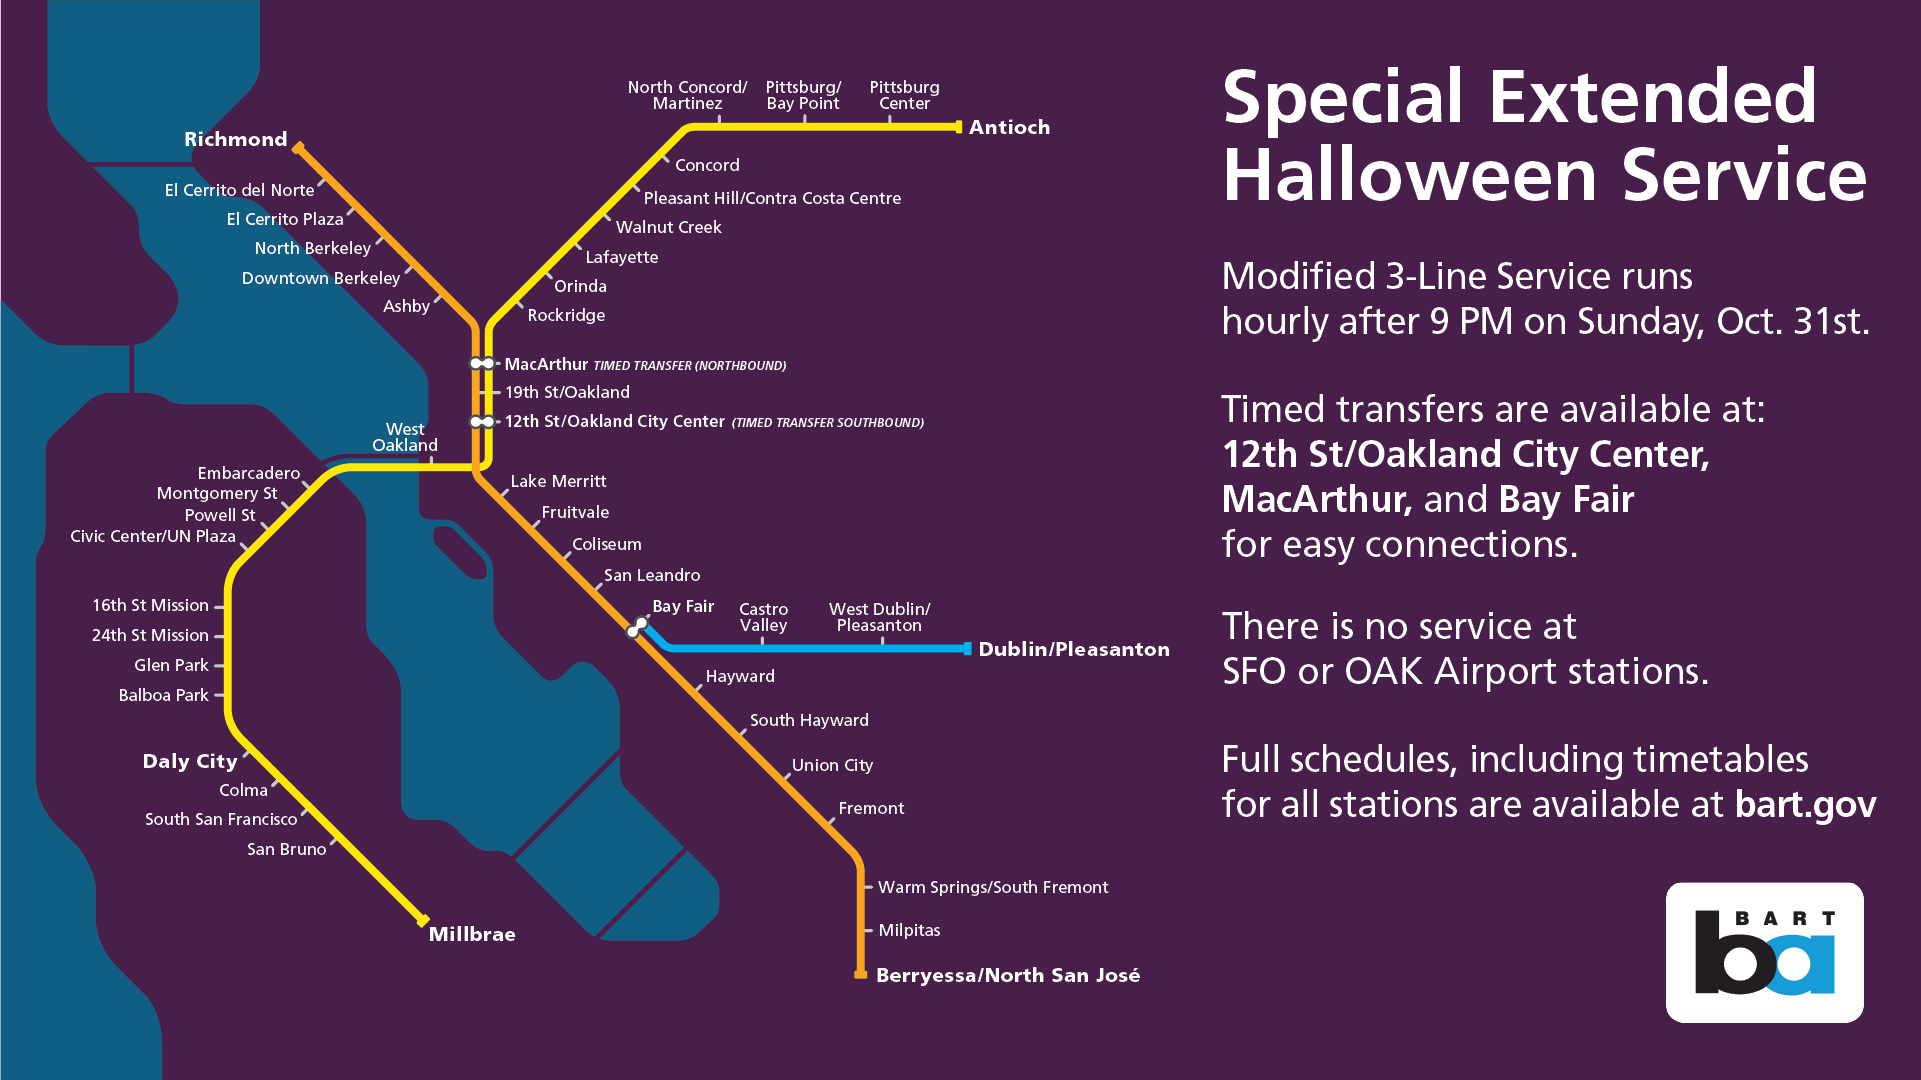 Special Extended Halloween Service